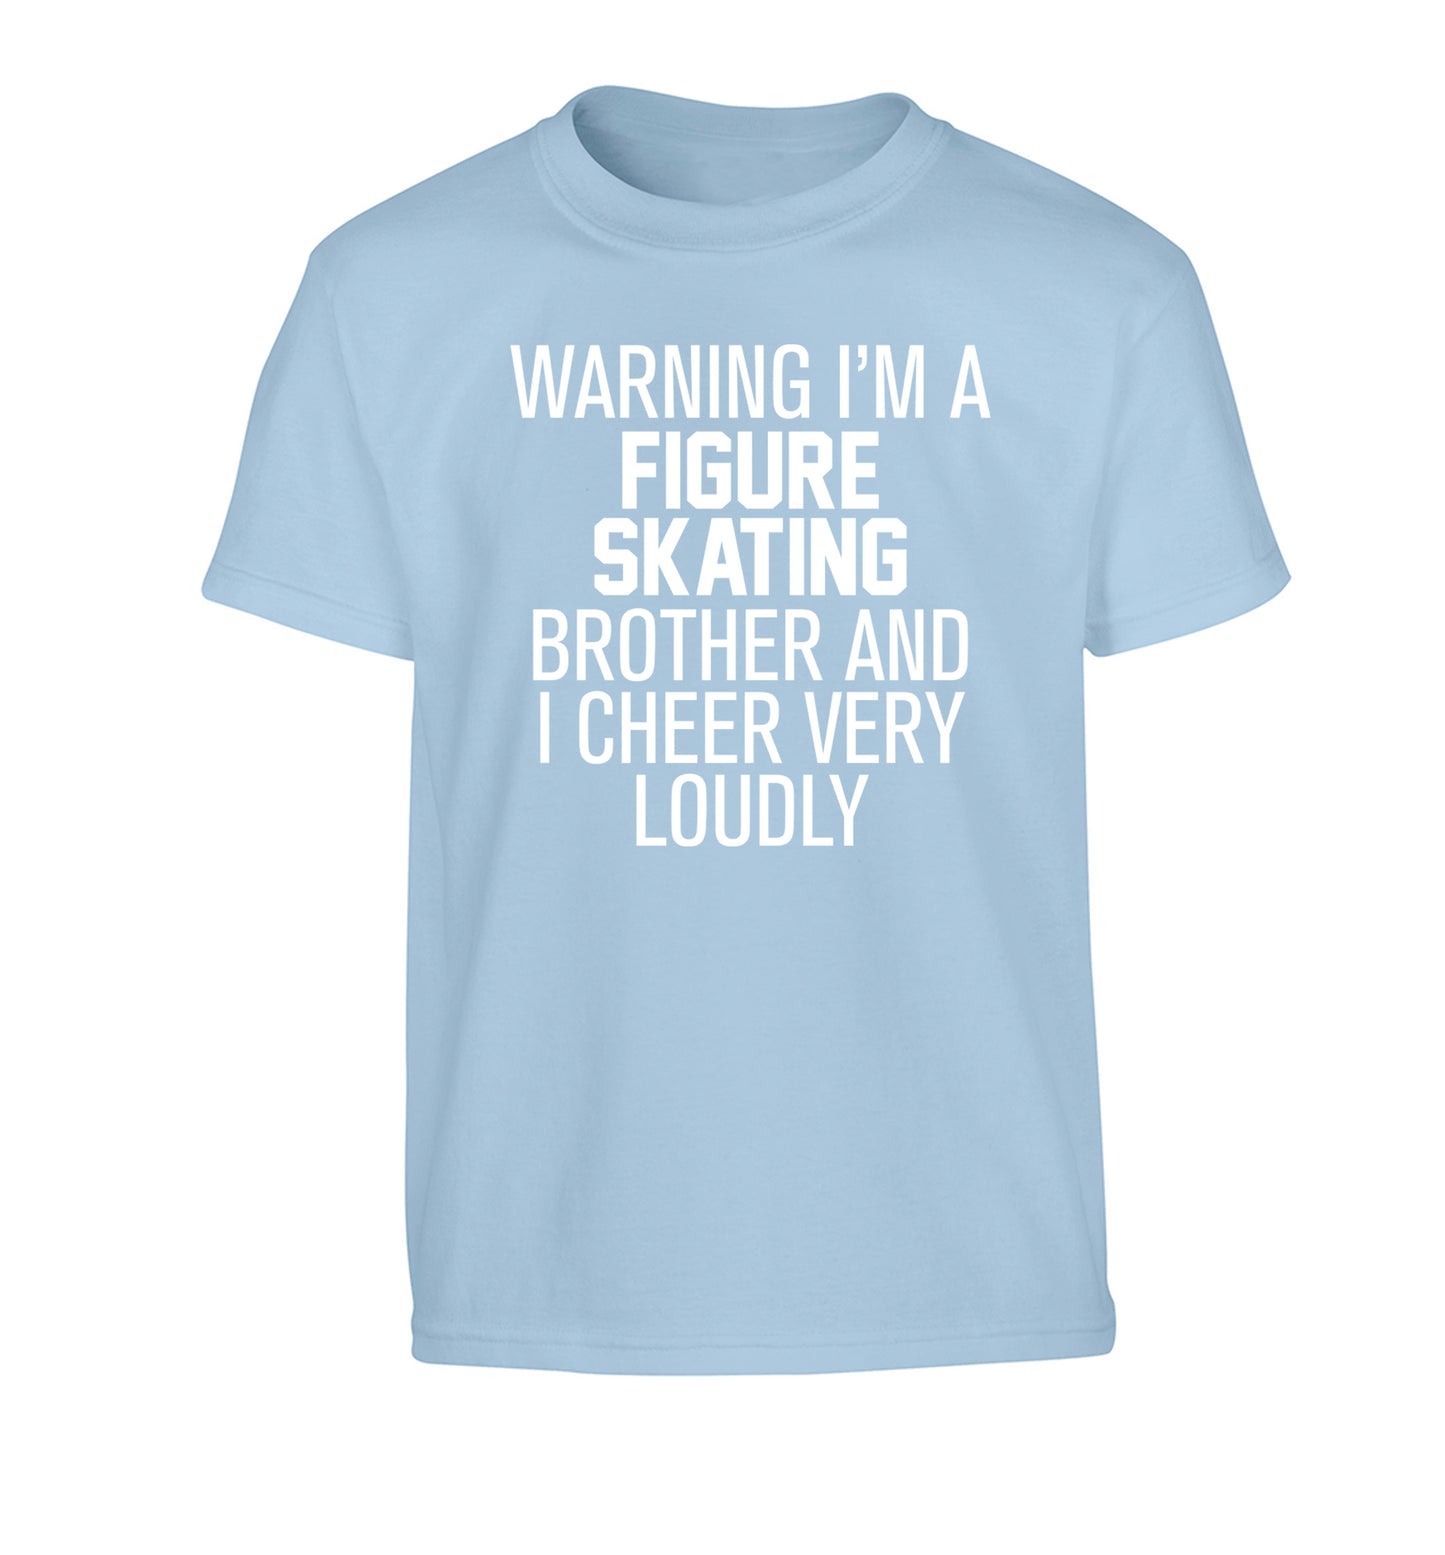 Warning I'm a figure skating brother and I cheer very loudly Children's light blue Tshirt 12-14 Years